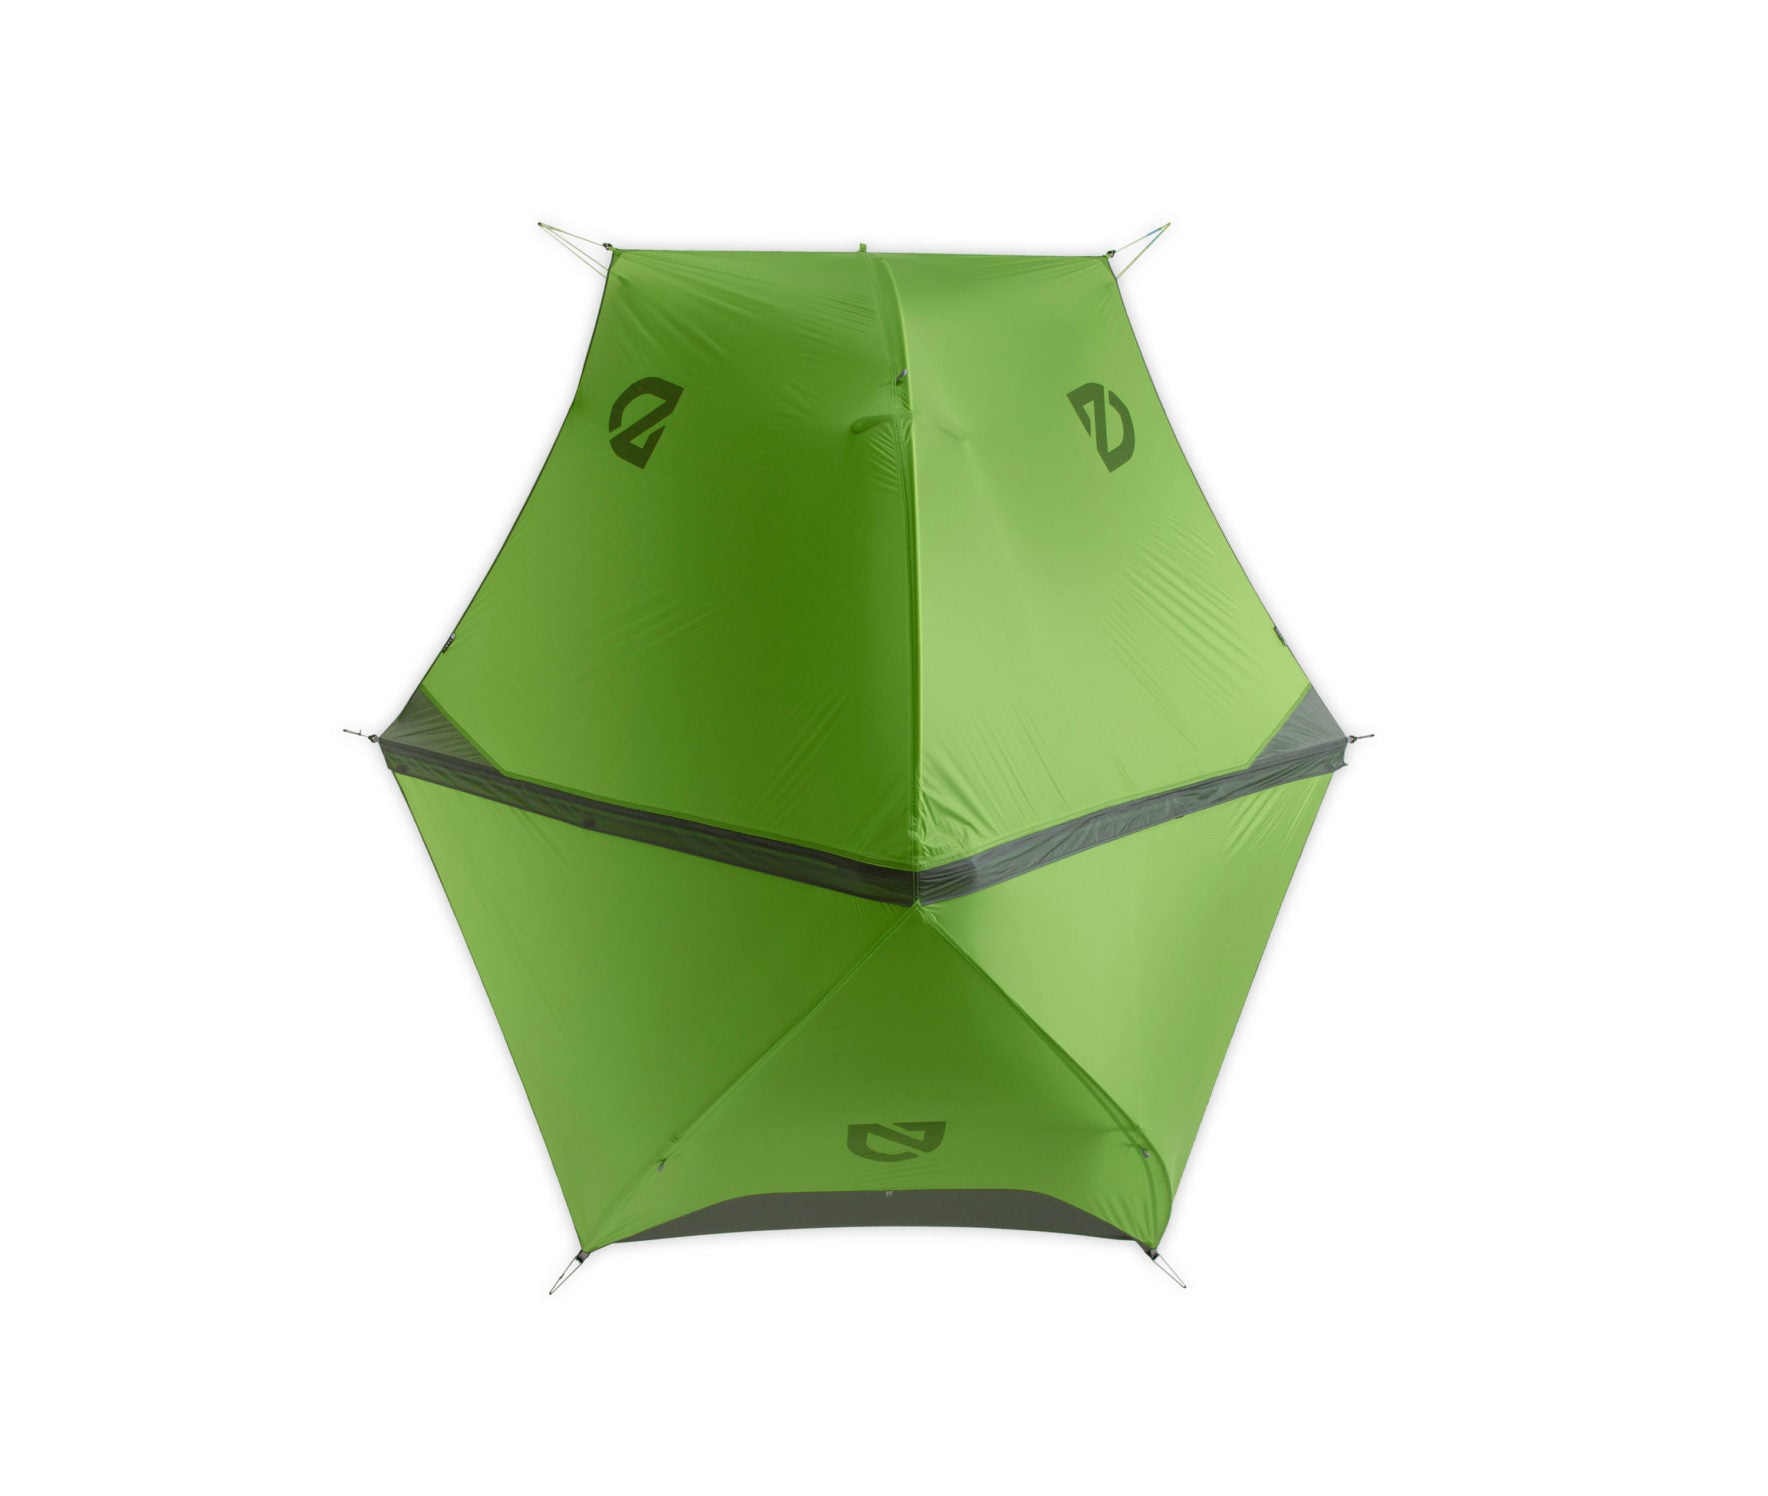 NEMO - Dragonfly™ Ultralight Backpacking Tent